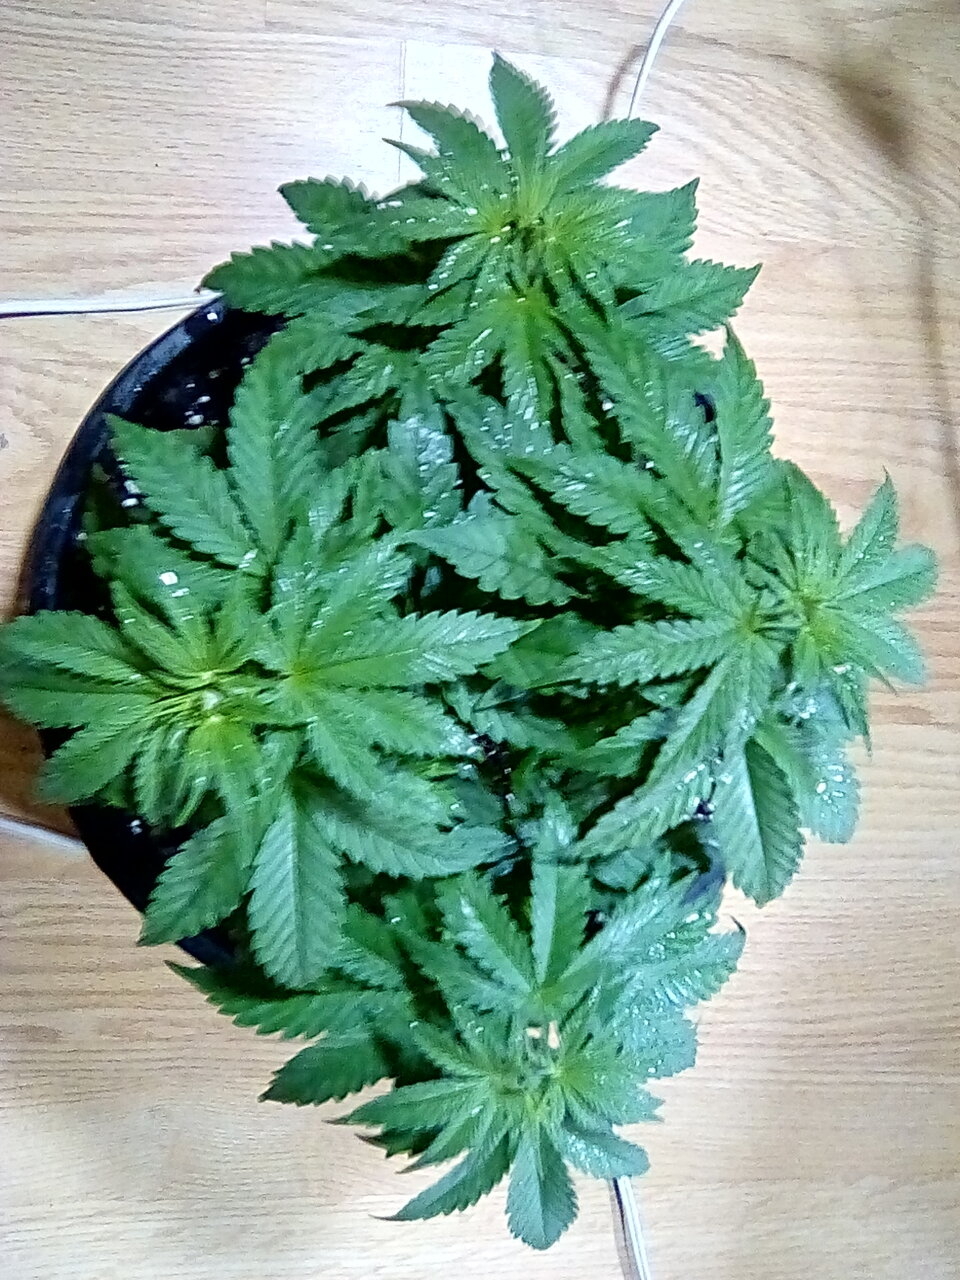 Day 29 from seed fruity pebbles from dutch seeds shops topped one time and 4 clones removed.